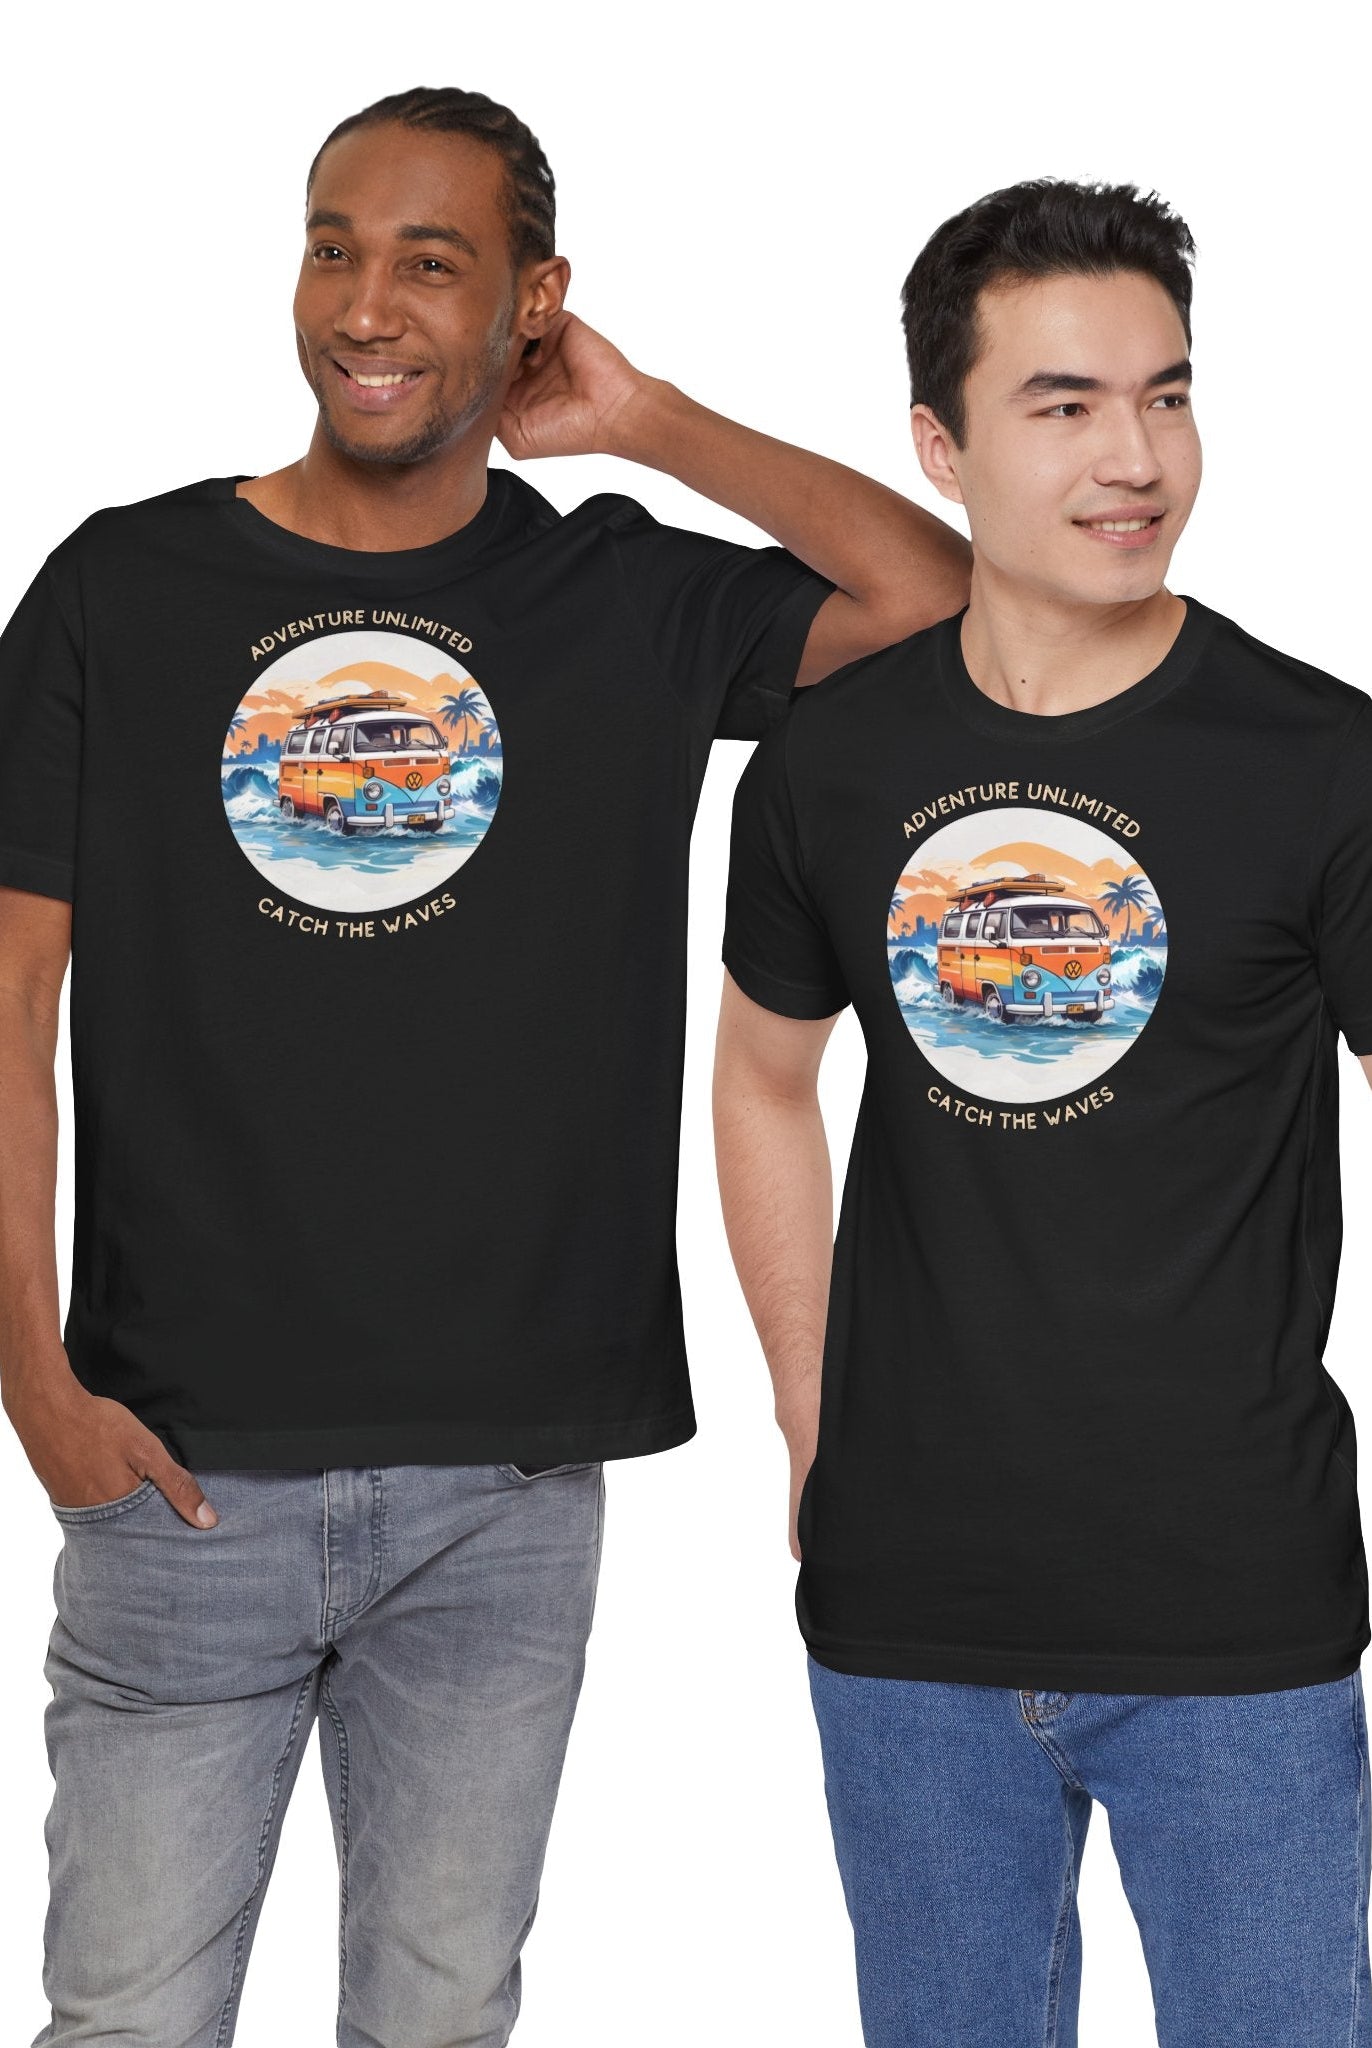 Adventure Unlimited - Surfing T-Shirt printed on black t-shirts with ’the best day ever’ text